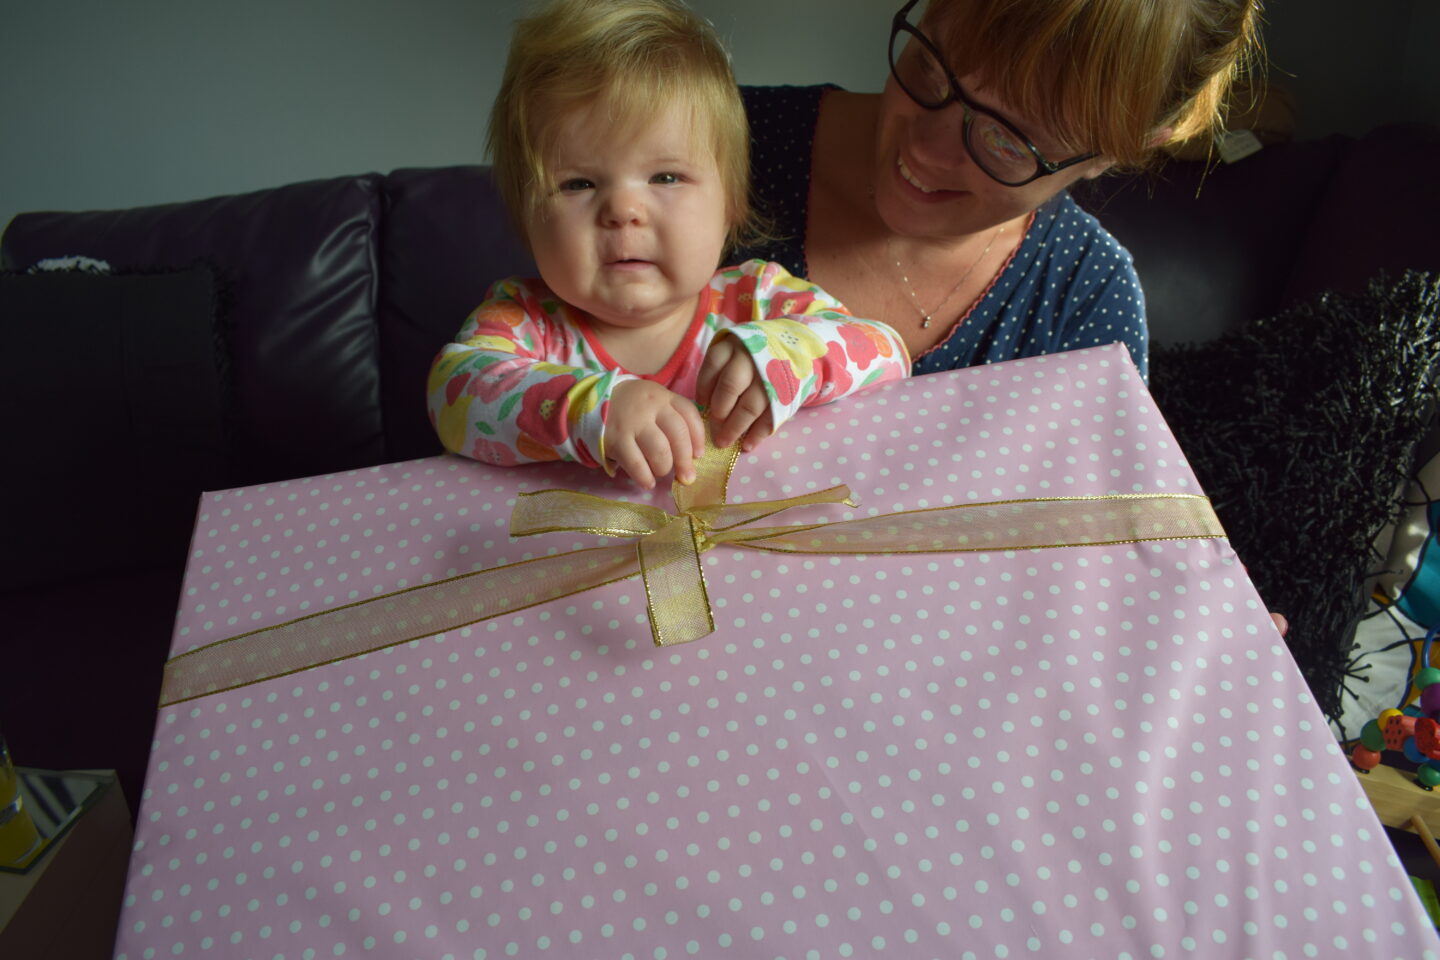 Happy days: A first birthday and family time